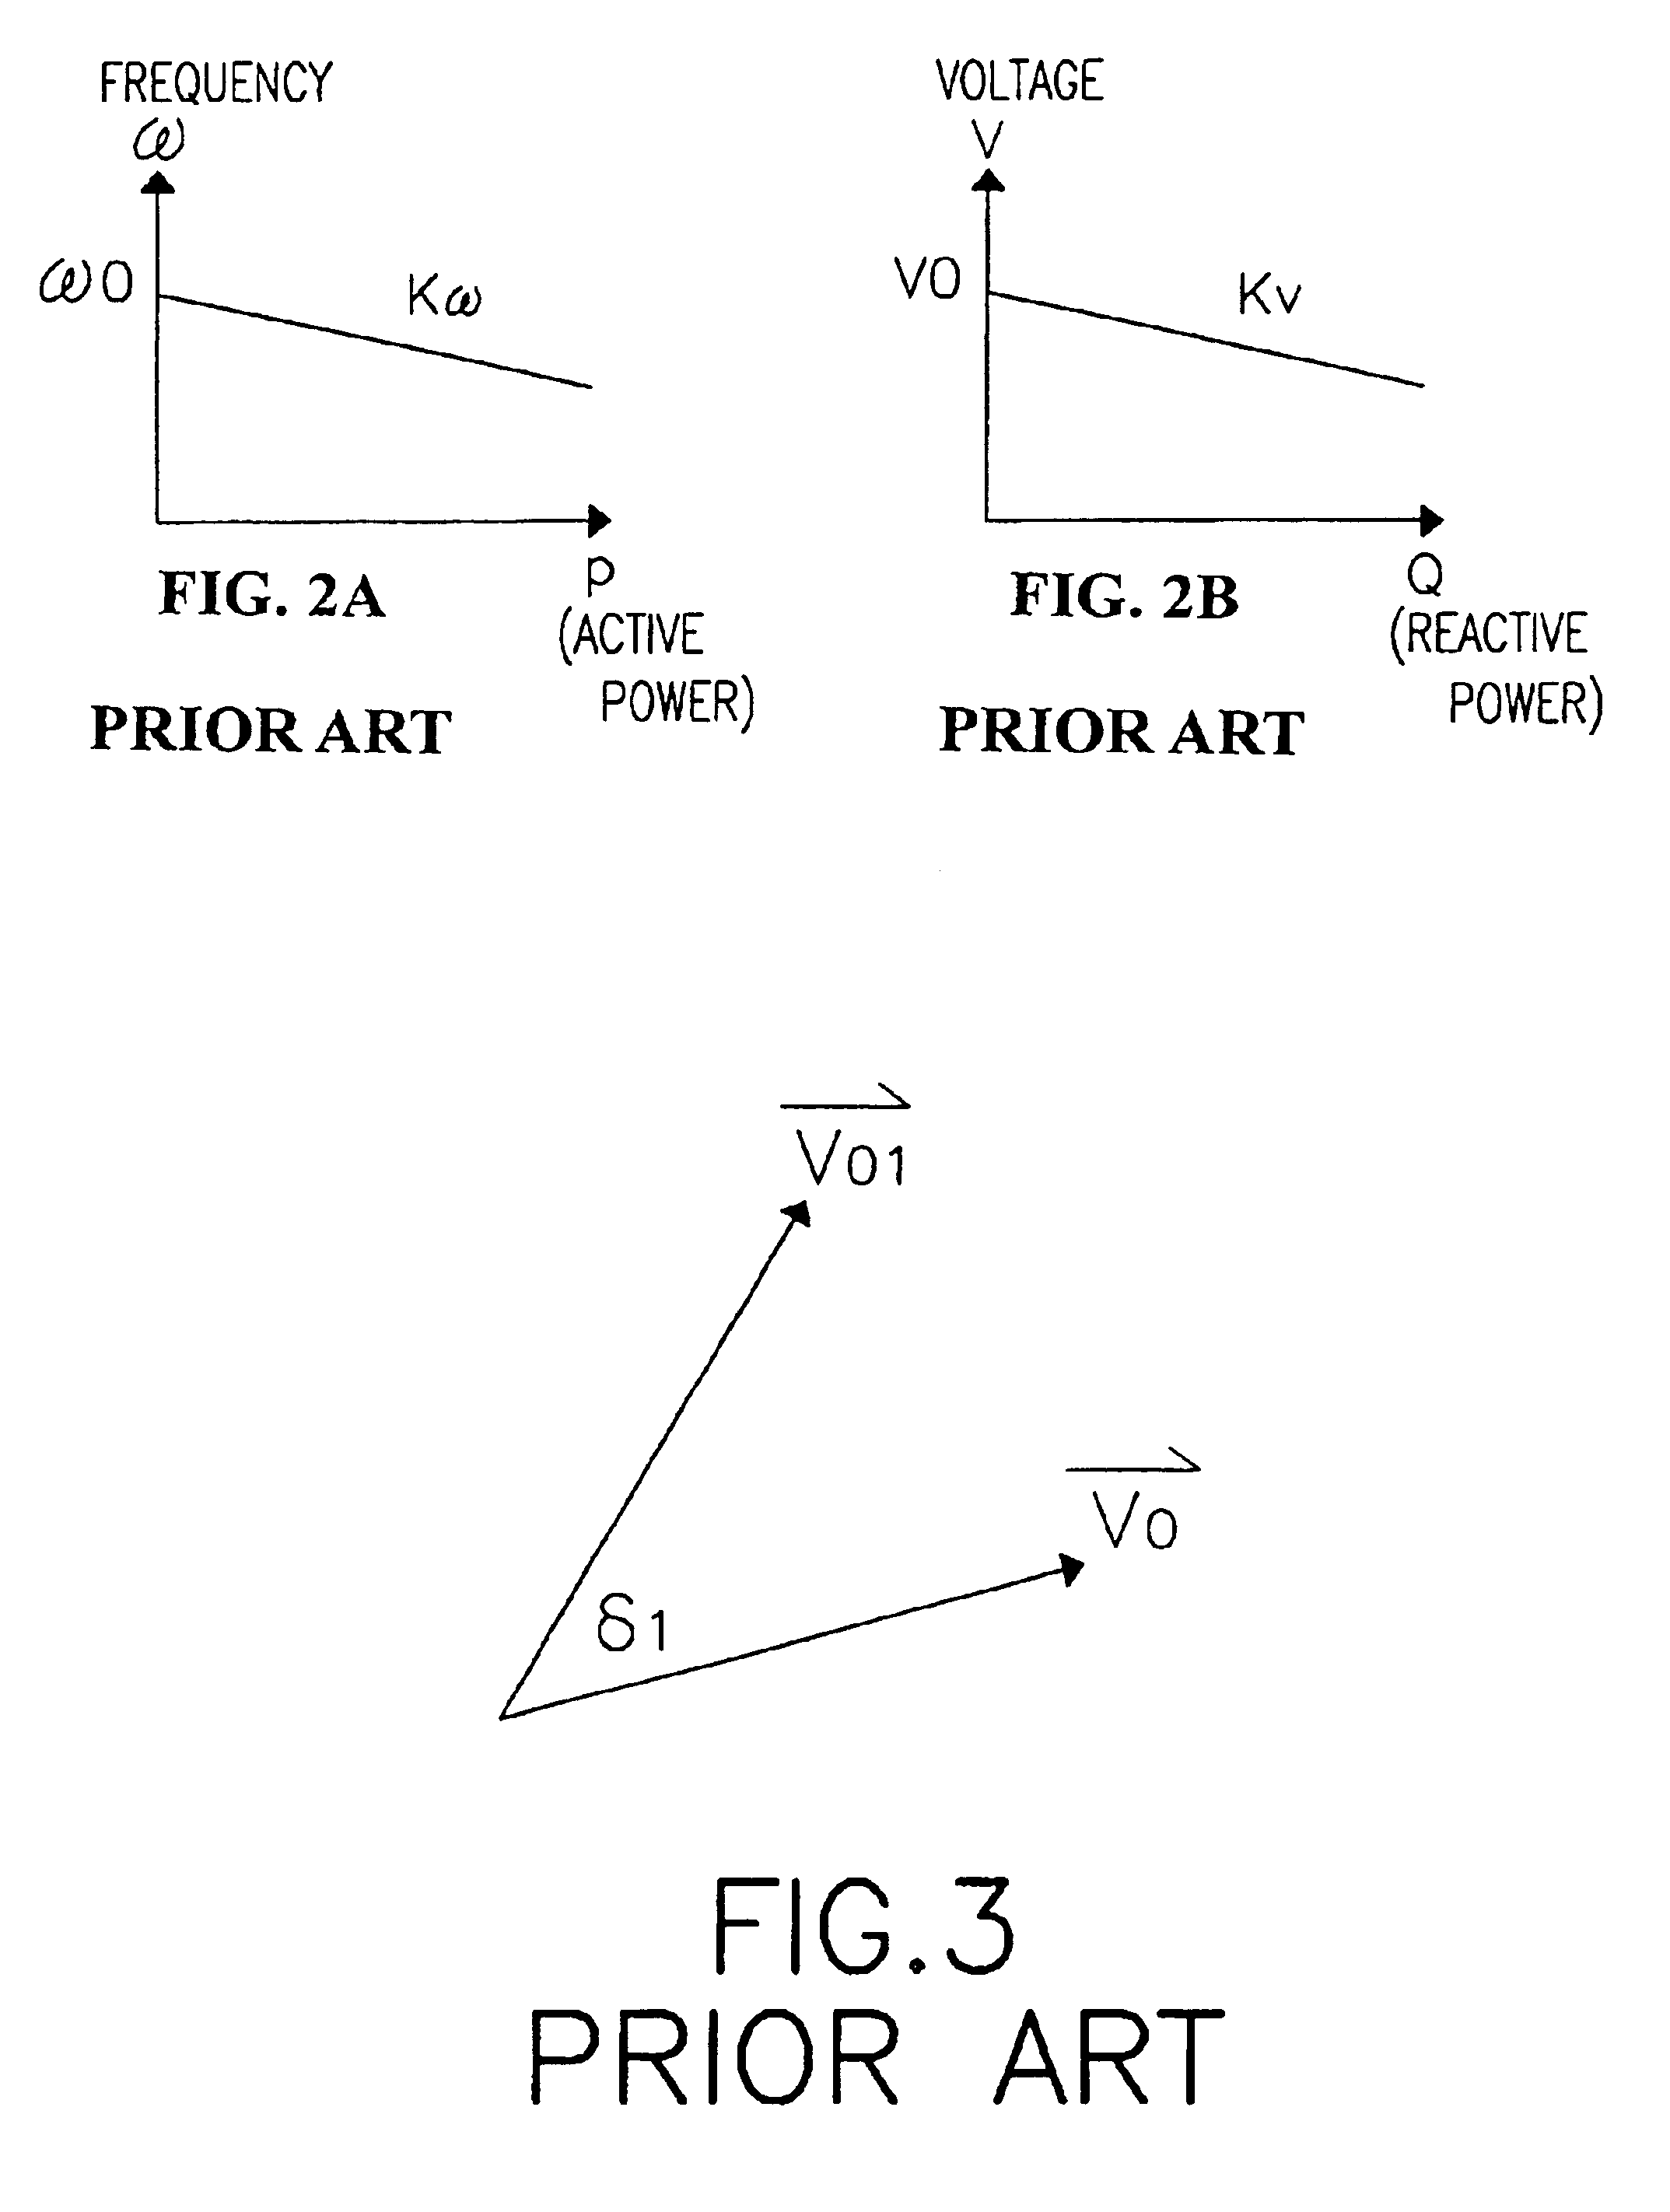 Parallel redundant power system and method for control of the power system